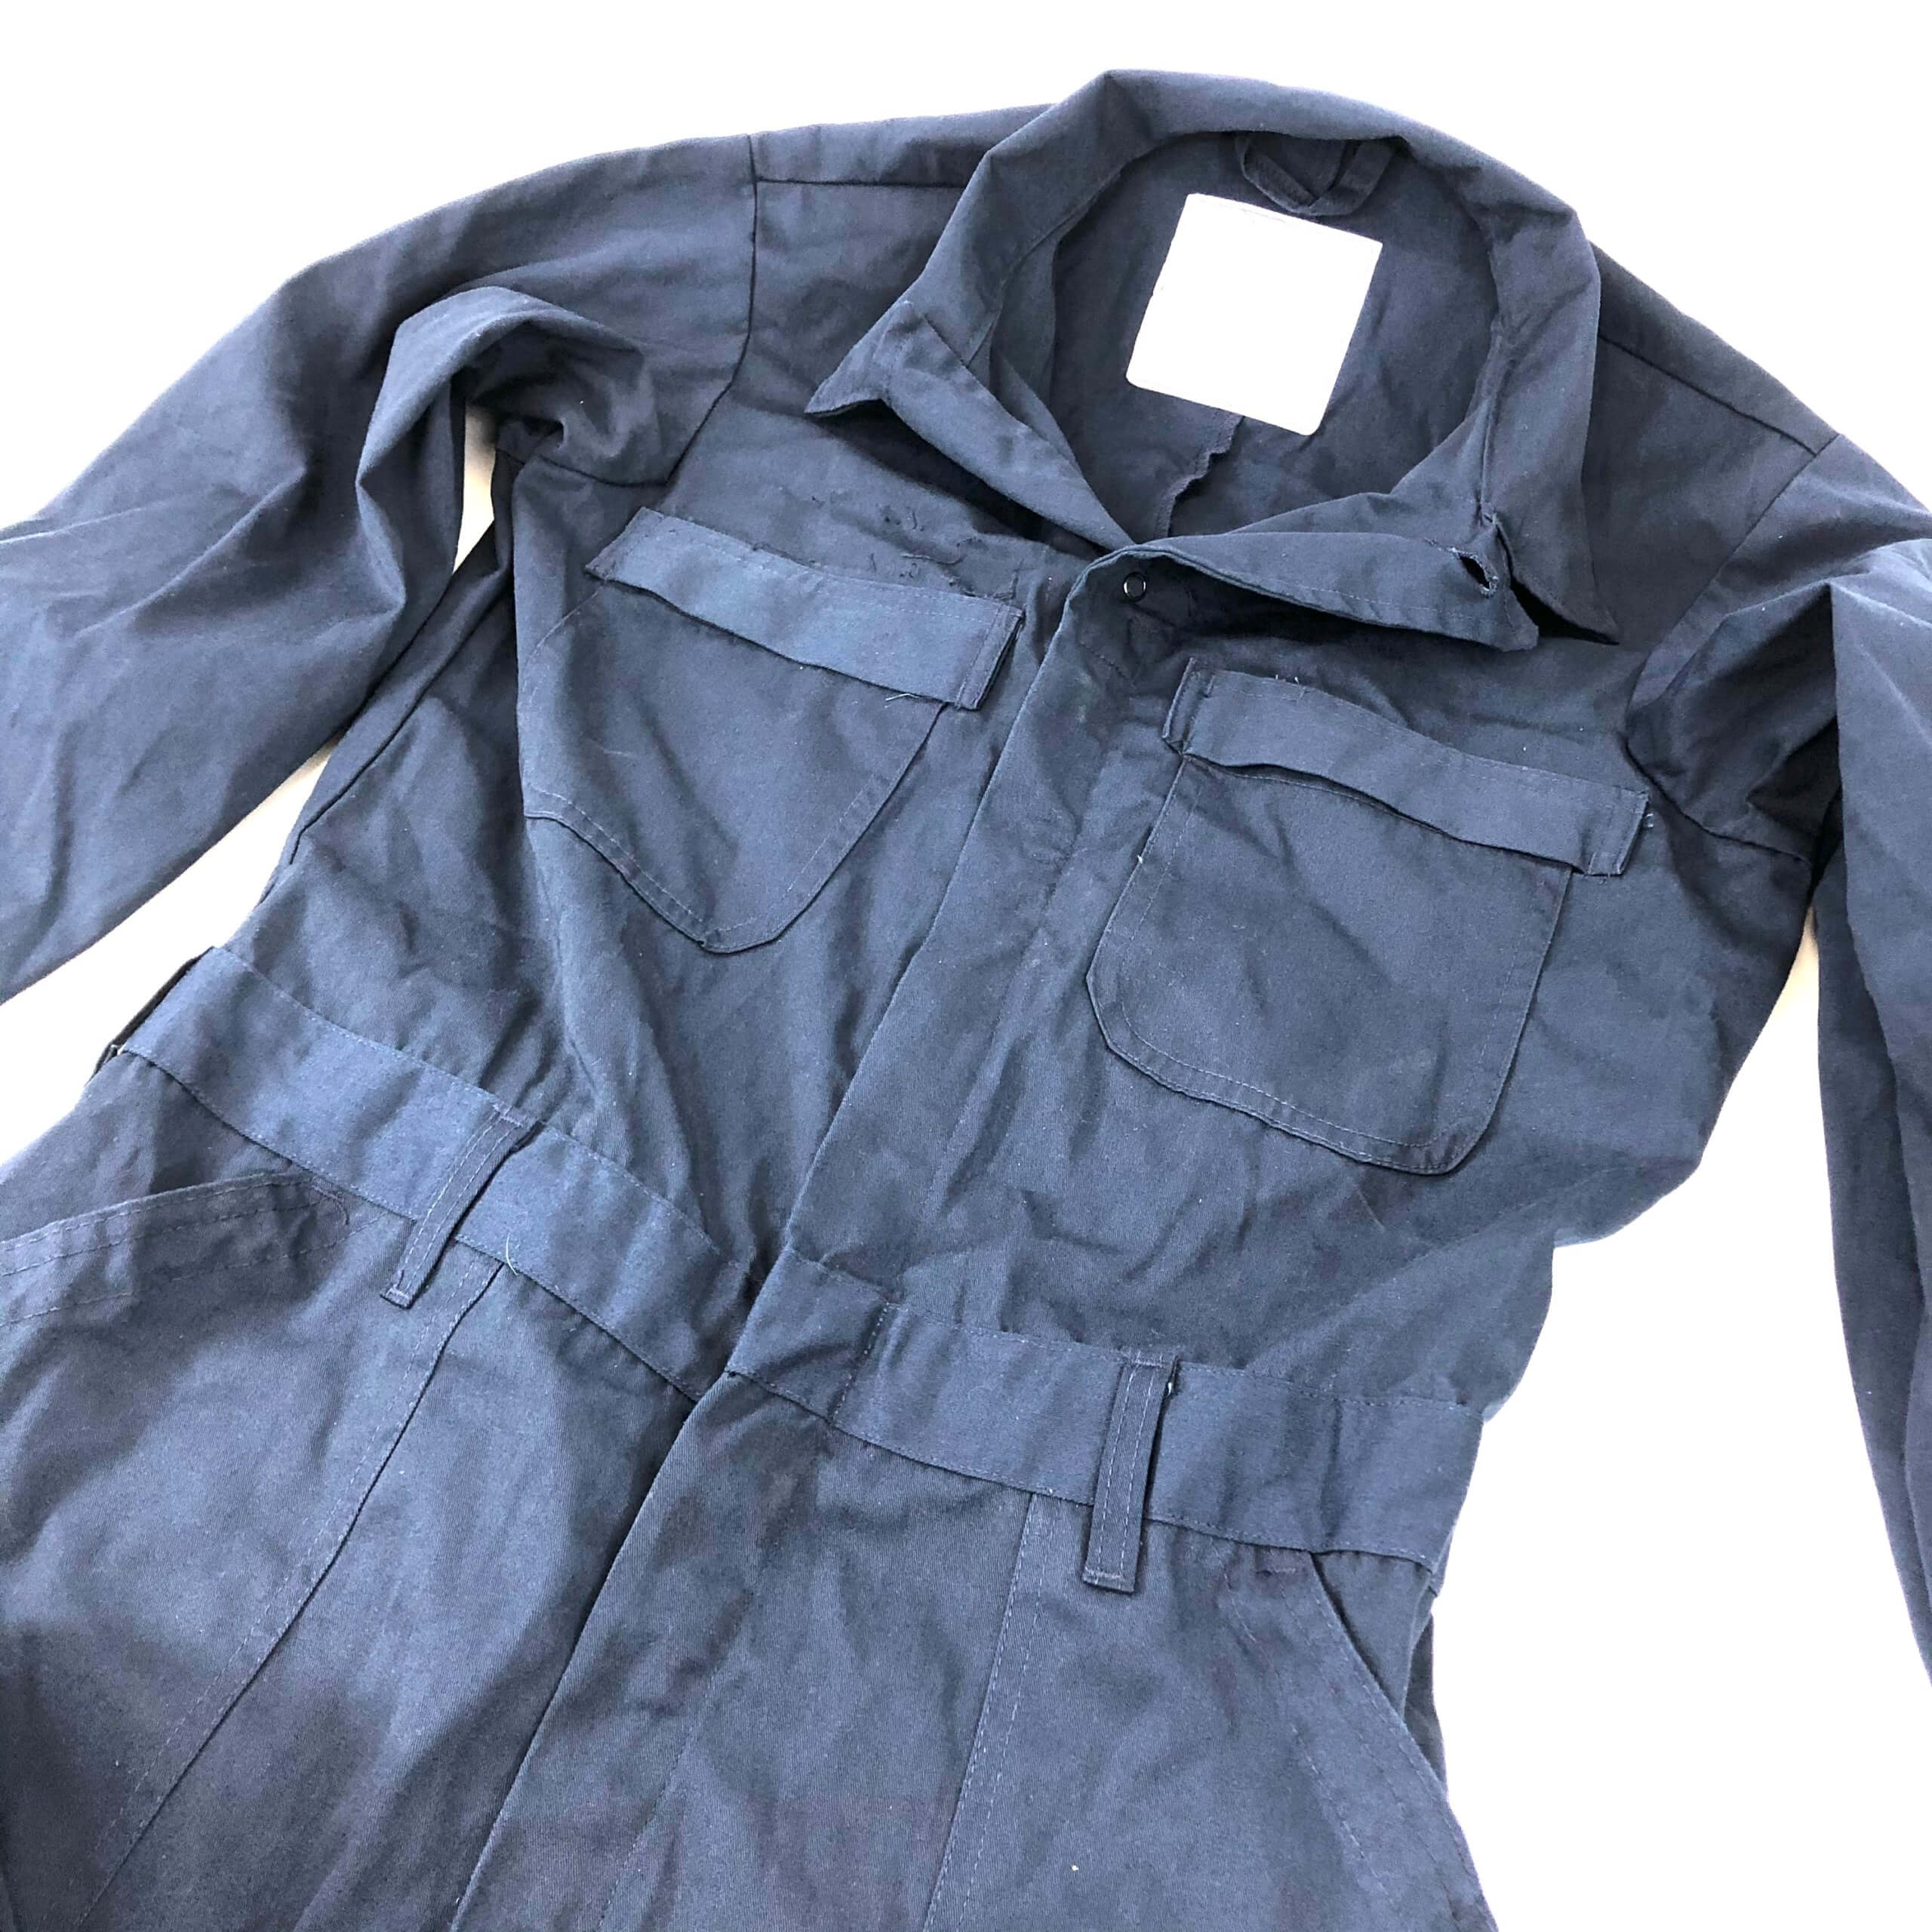 US Navy Utility Coveralls, Navy Blue [Genuine Navy Issue]